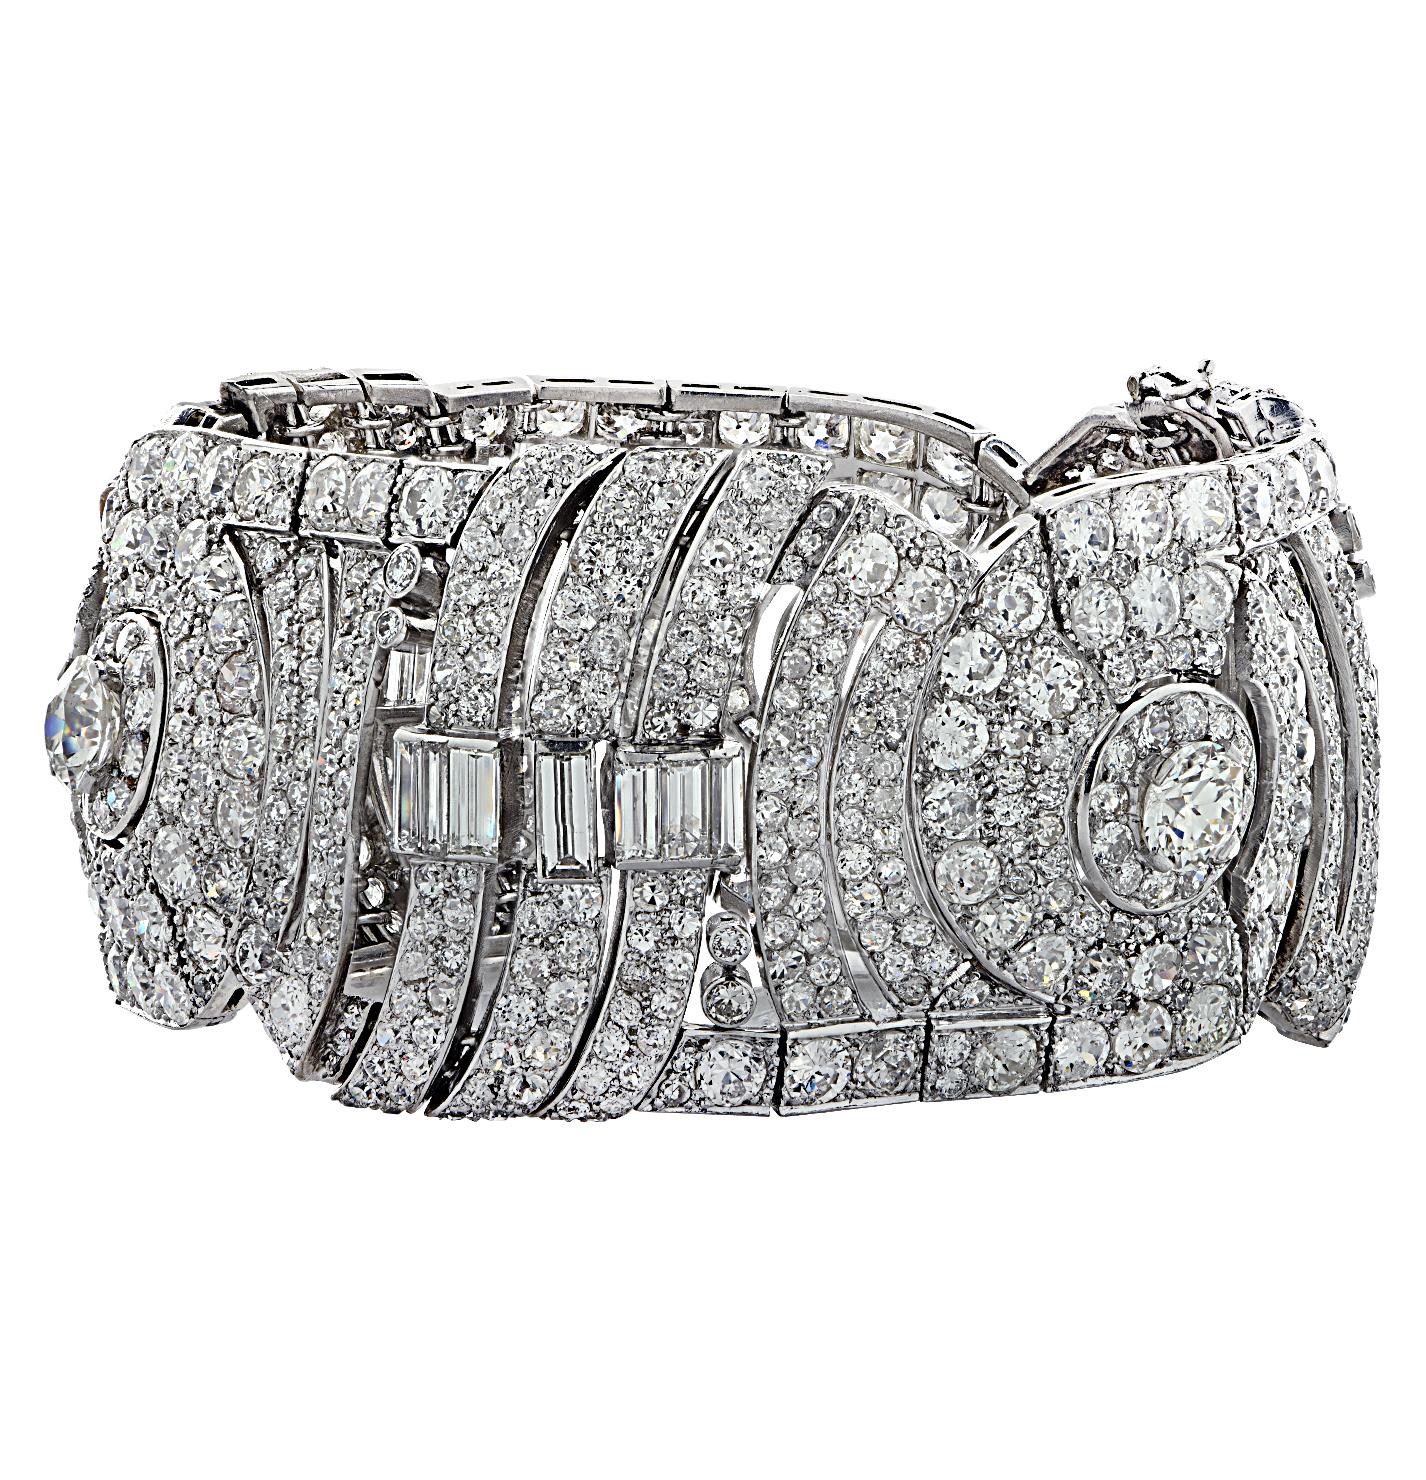 Exquisite Art Deco bracelet crafted in platinum, featuring Old European Cut Diamonds and Baguette Cut Diamonds weighing approximately 42 carats total, H-J color, VS-SI clarity. Diamond encrusted open plates showcase Old European cut diamonds set in